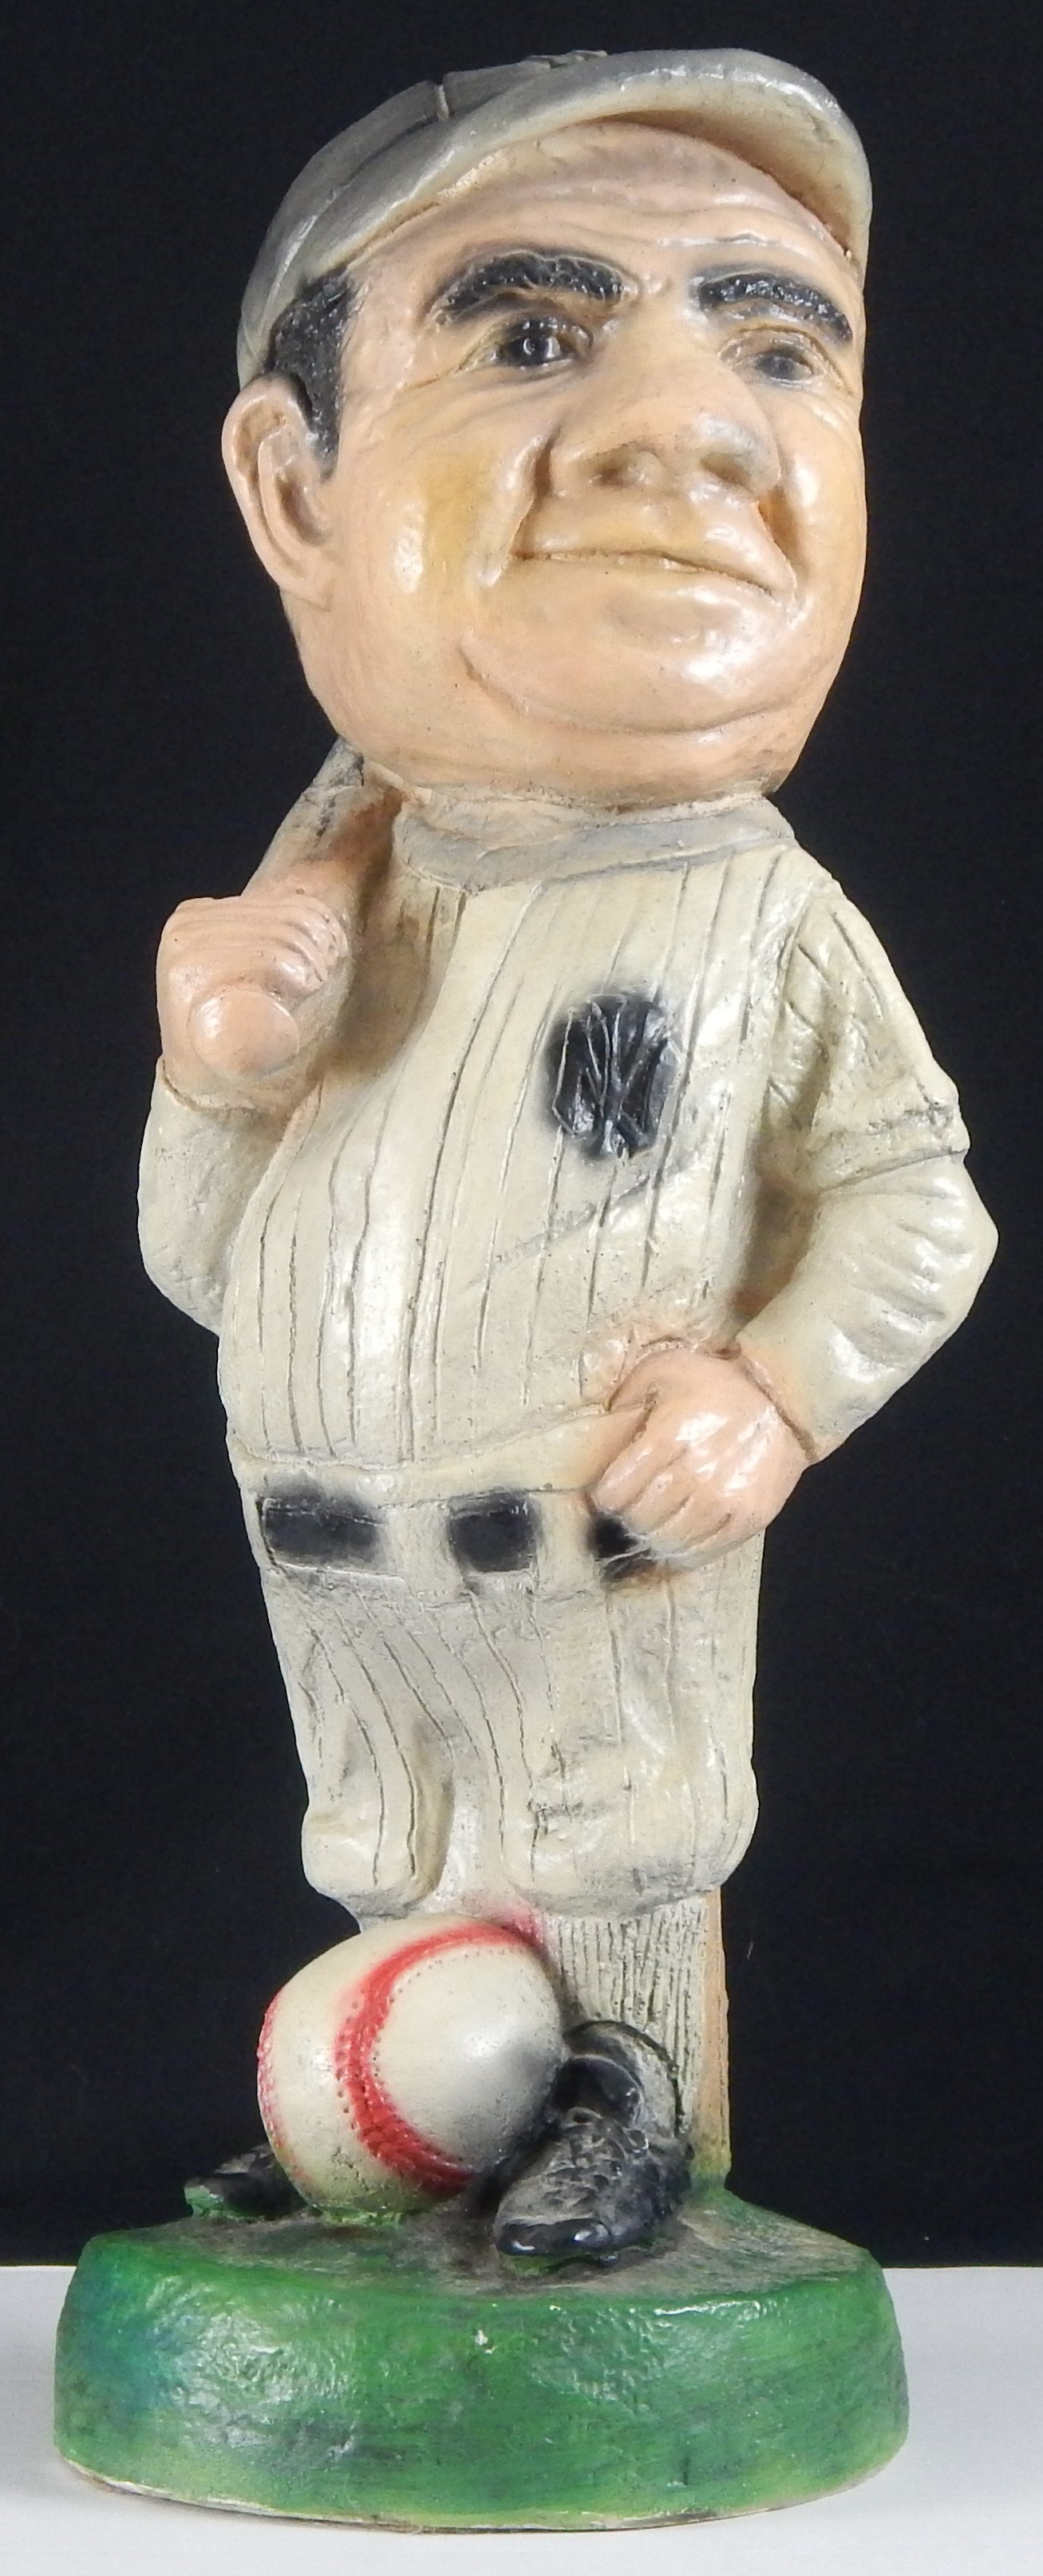 - 1960s Babe Ruth Scarce Esco-Style Statue with Coin Bank (23" tall)